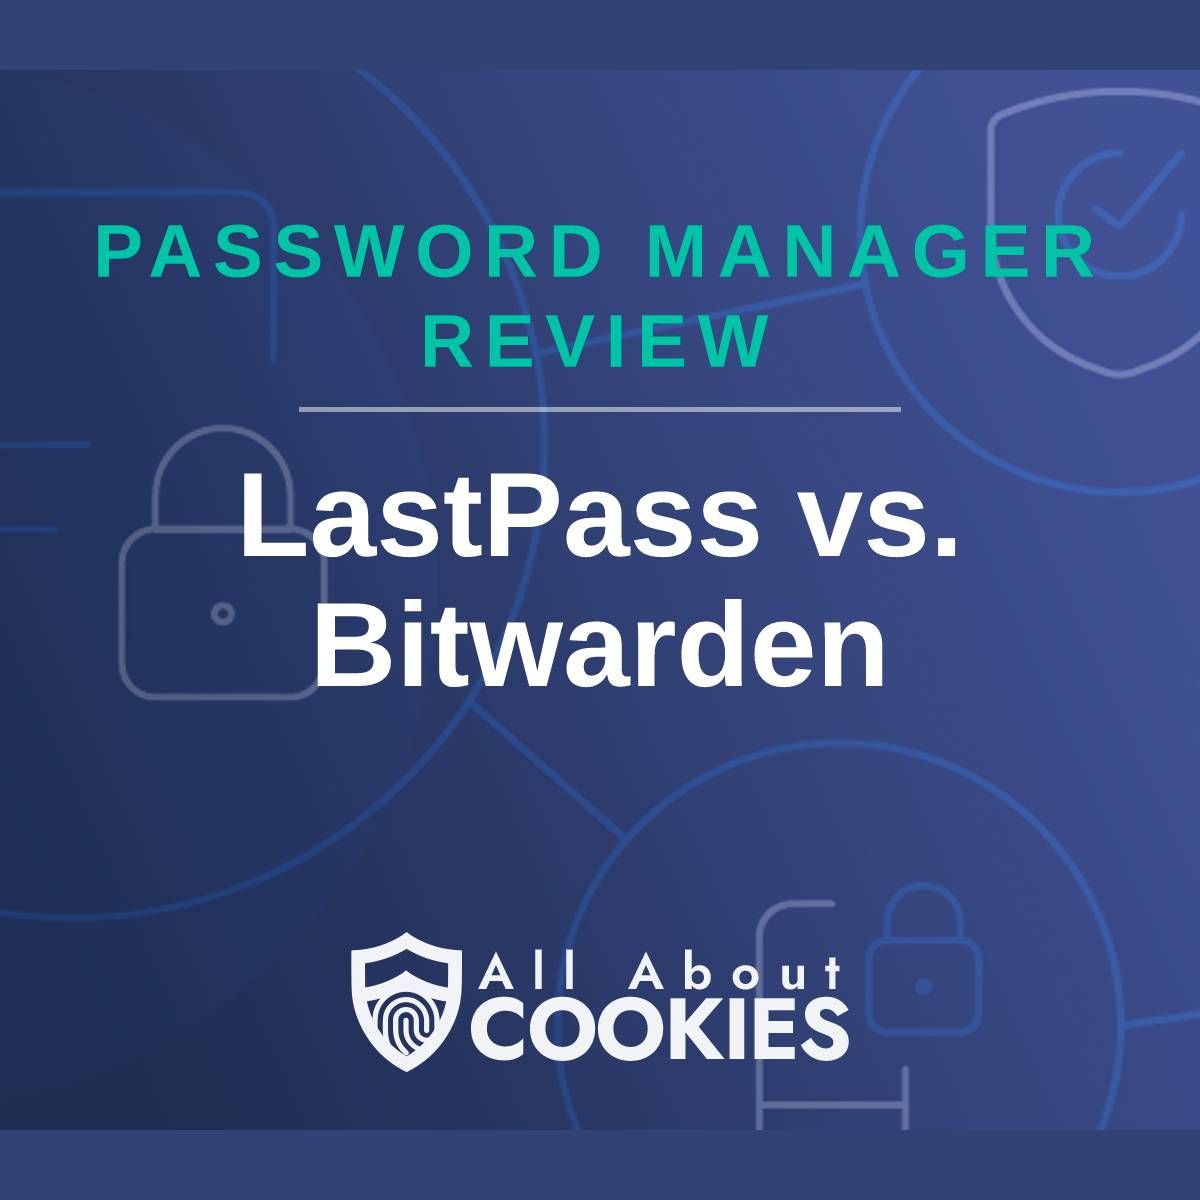 A blue background with images of locks and shields with the text &quot;Password Manager Review LastPass vs. Bitwarden&quot; and the All About Cookies logo. 